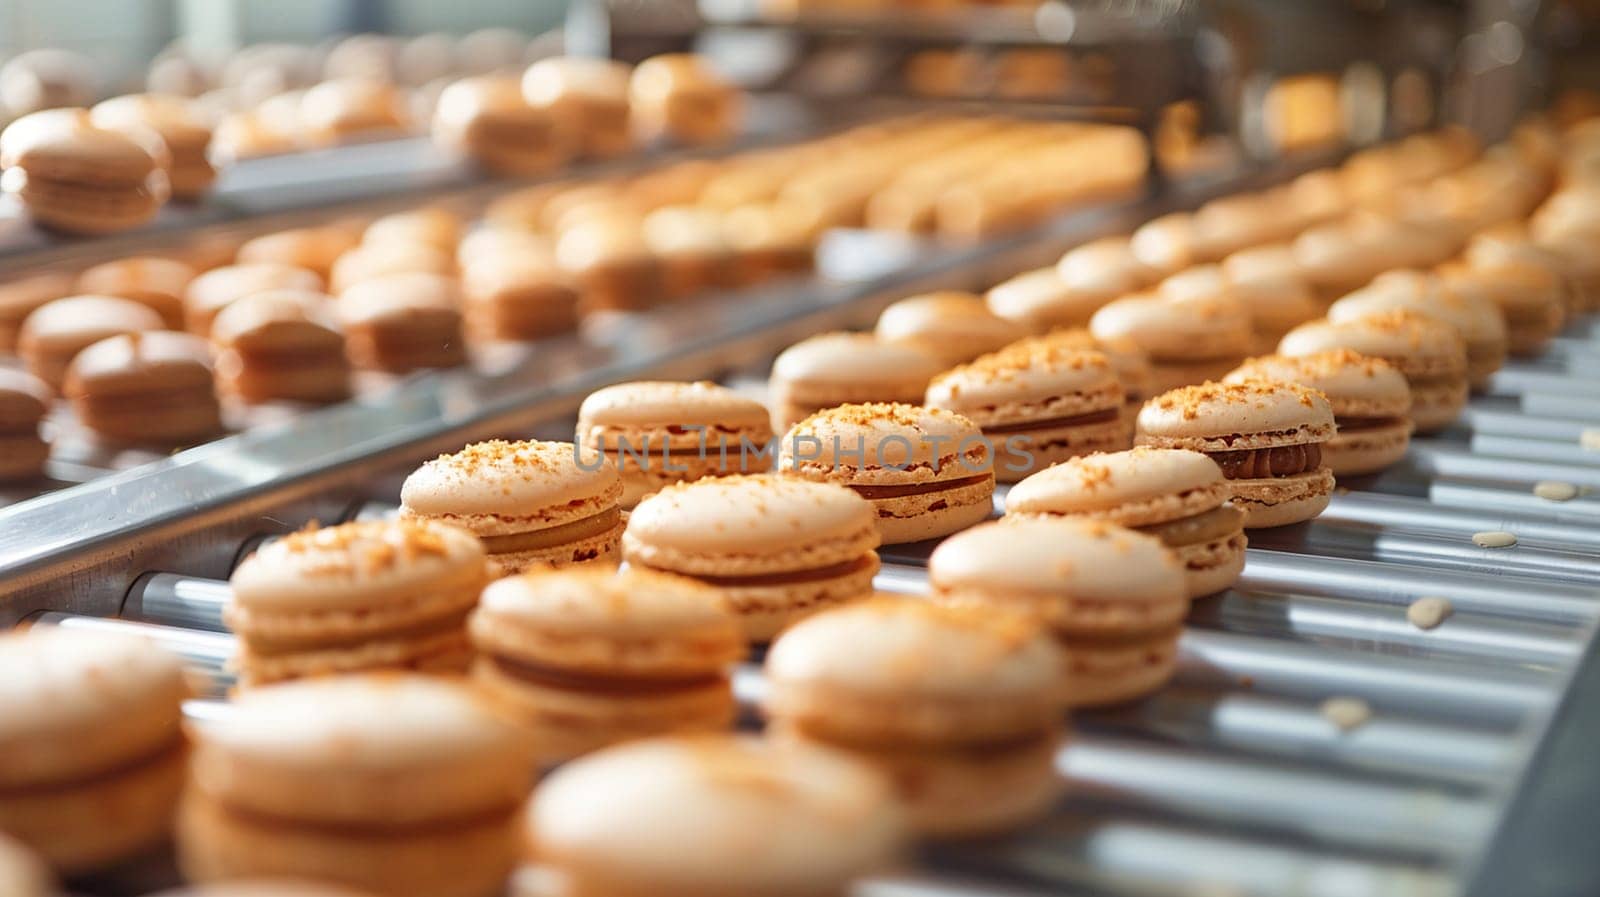 Close-up view of freshly made macaroons moving on conveyor belt in industrial dessert production setting